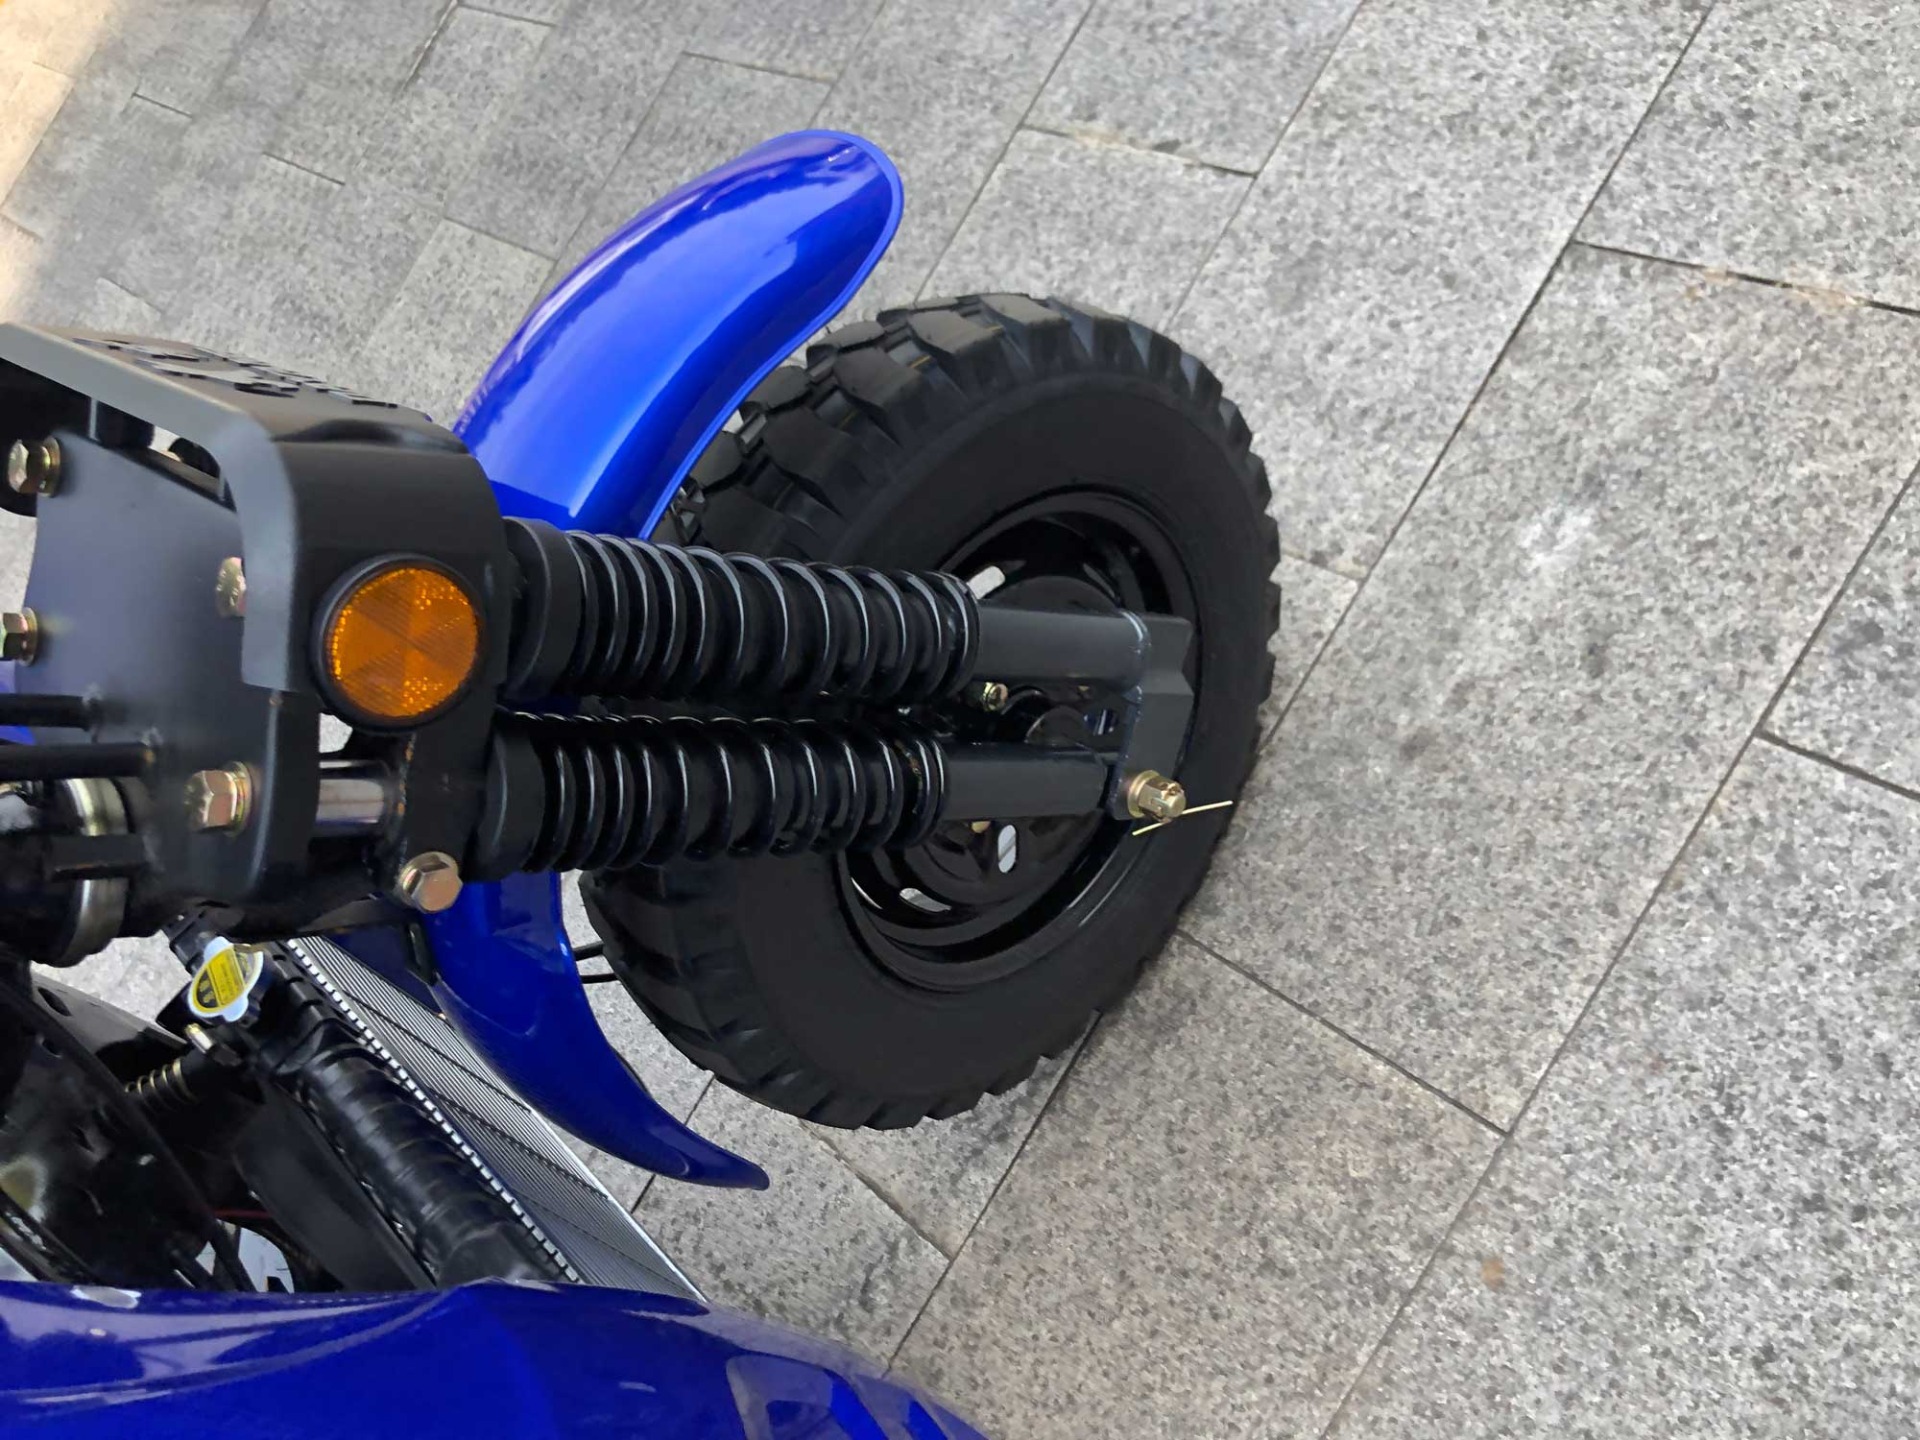 3 wheel motorcycle Tricycles Motorized 175cc farming truck cargo tricycle water cooling customized